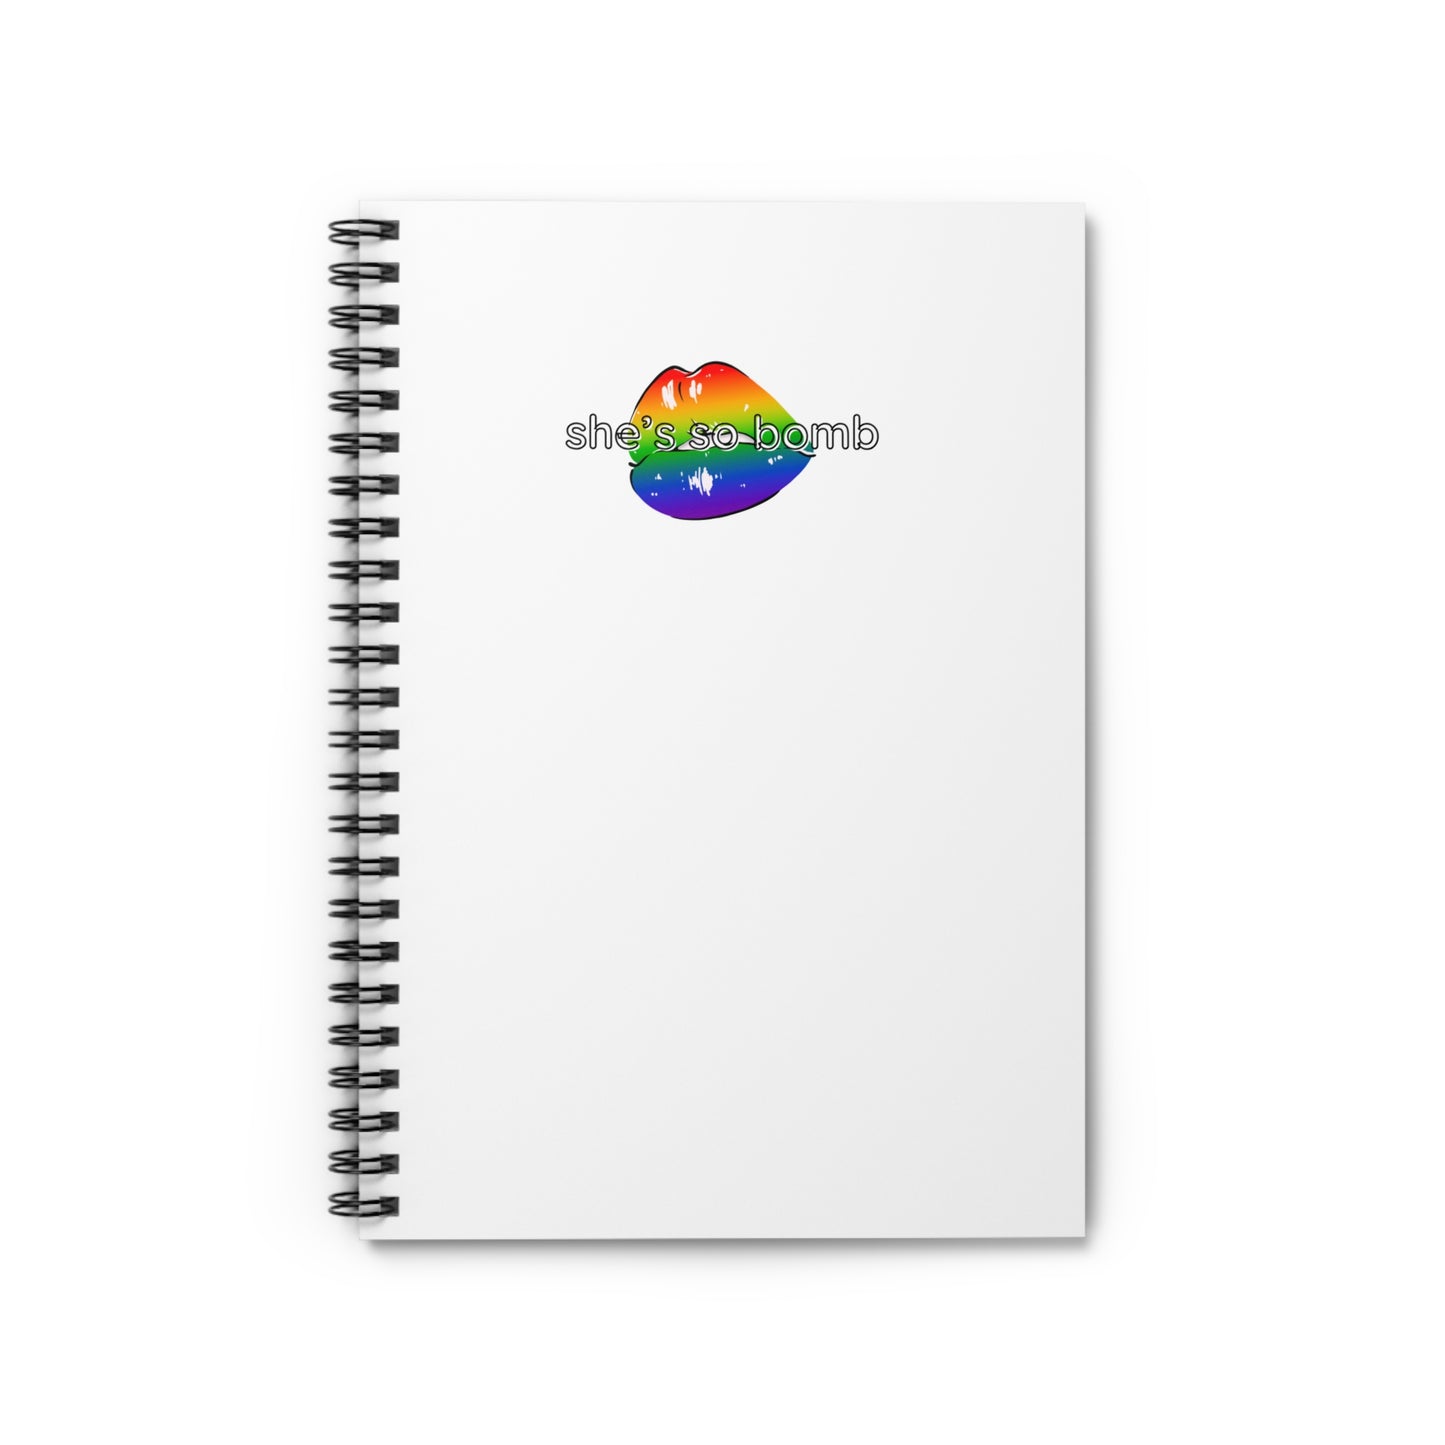 RAINBOW BOMB LIPS Spiral Notebook - Ruled Line